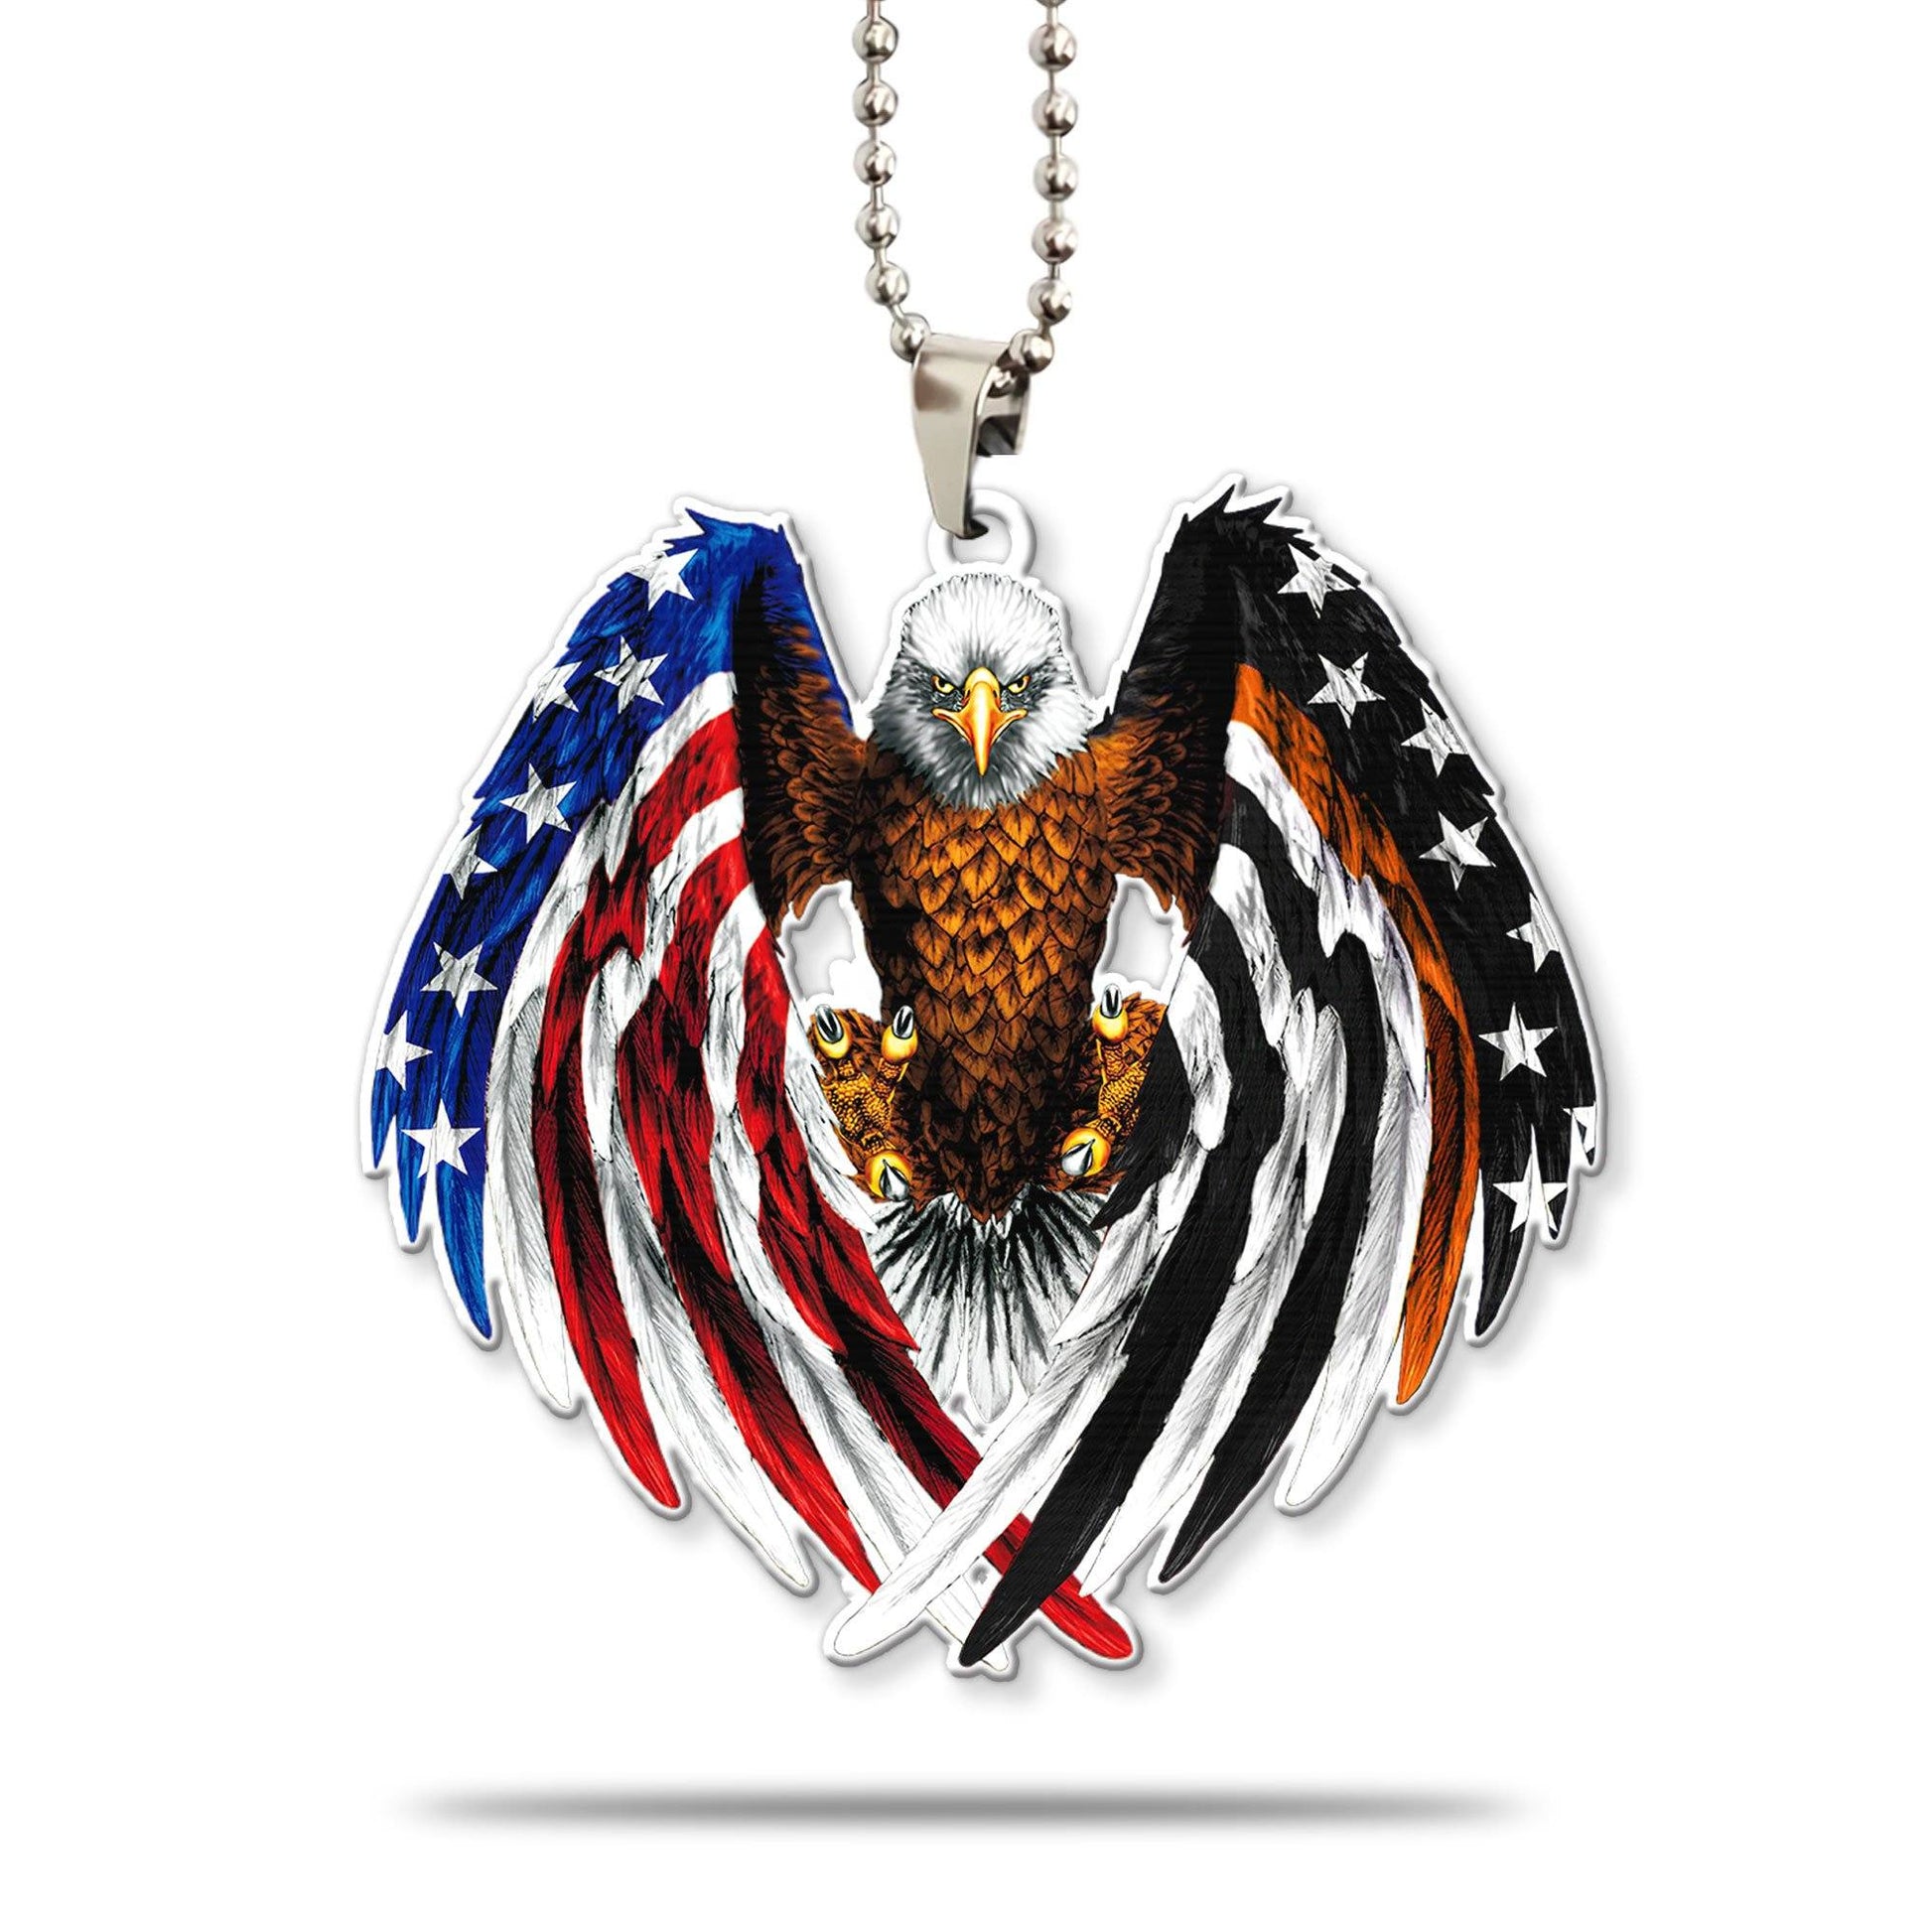 Gearhumans 3D The Majesty Of The Bald Eagle And Thin Orange Line American Custom Car Hanging GS0706212 Car Hanging Car Hanging/1 Pack 